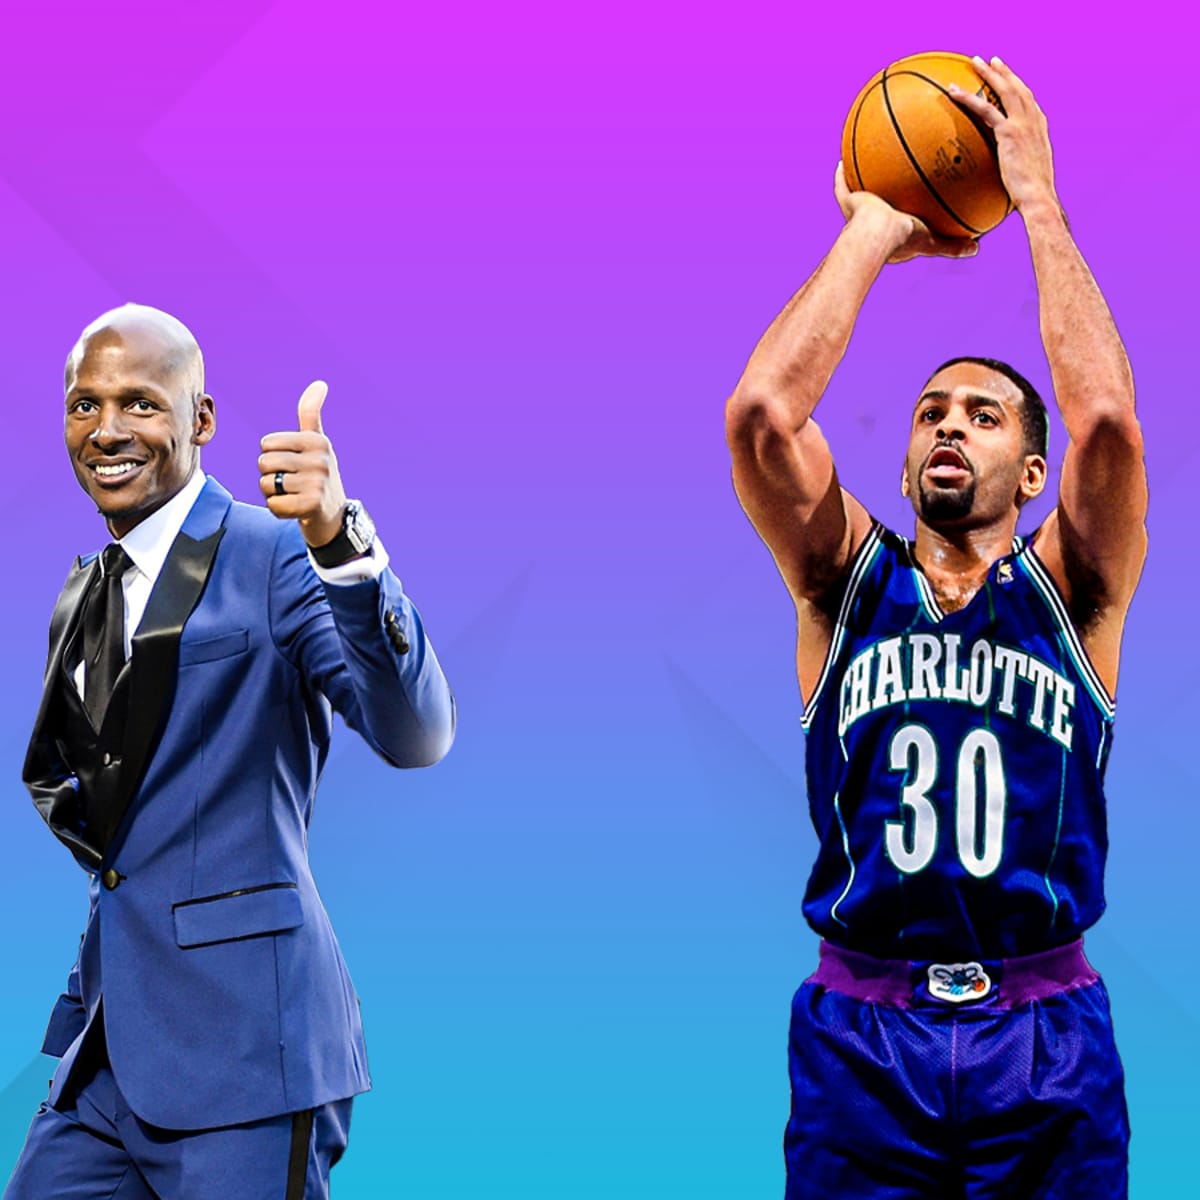 Ray Allen Says Dell Curry Is The Greatest Shooter Of All-Time: 